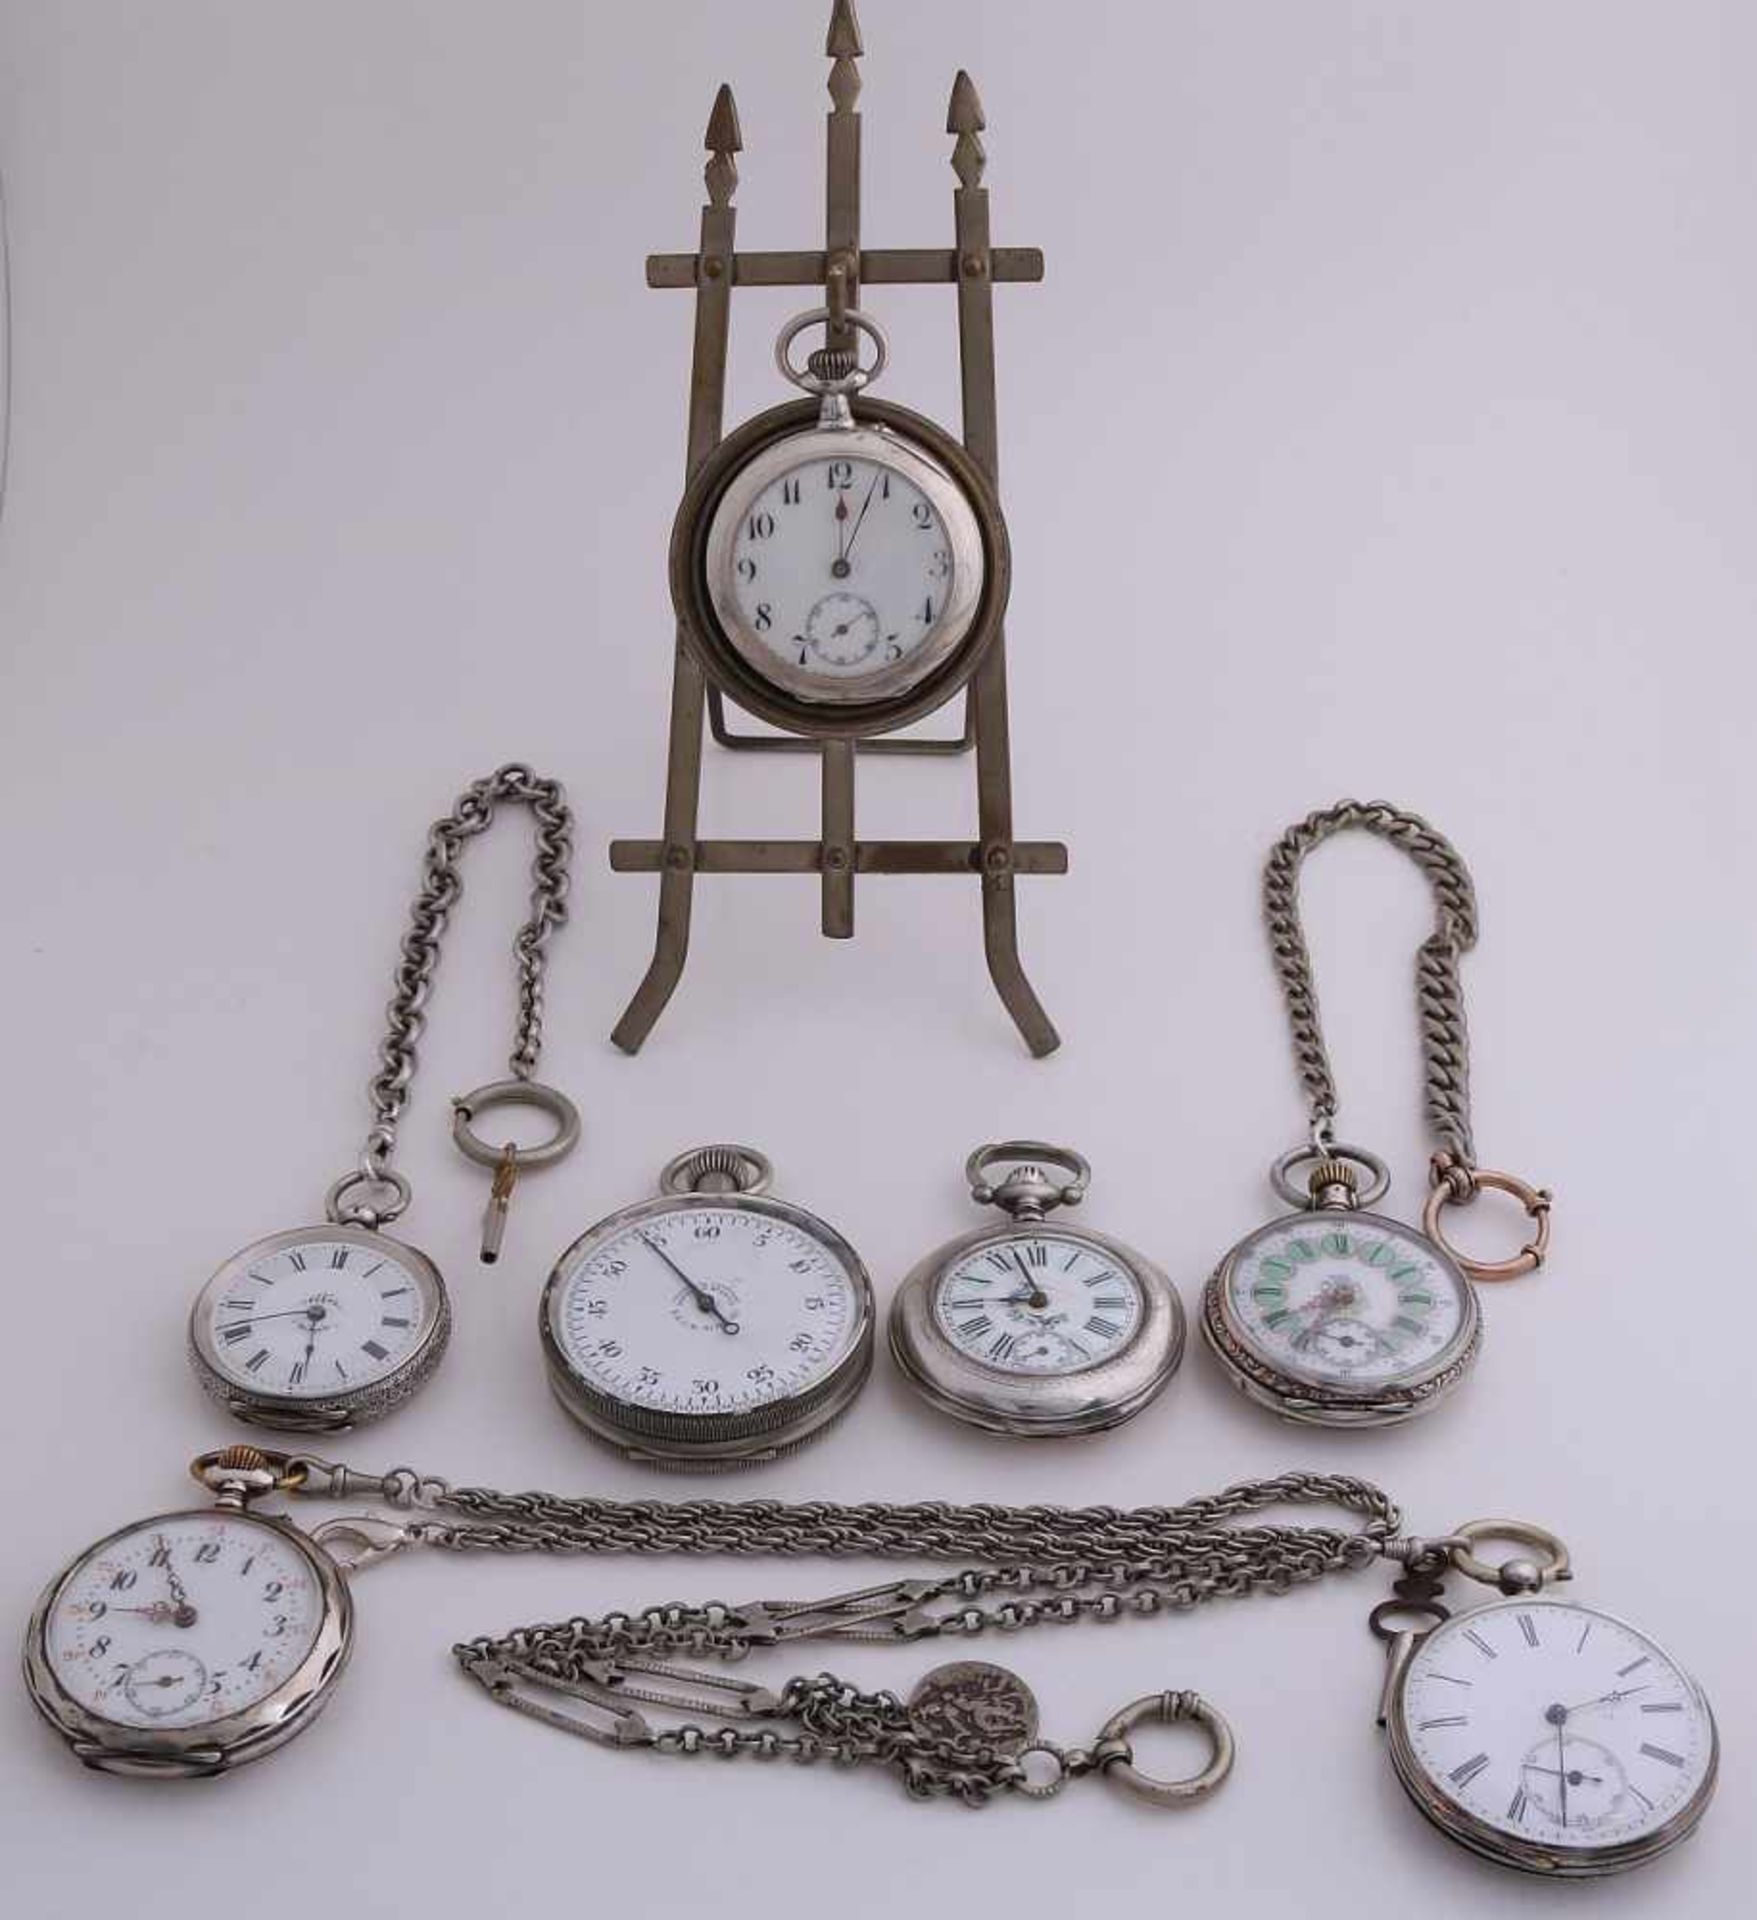 Lot 6 antique pocket watches, stop watch and a holder. Partly silver and four watch chains. In